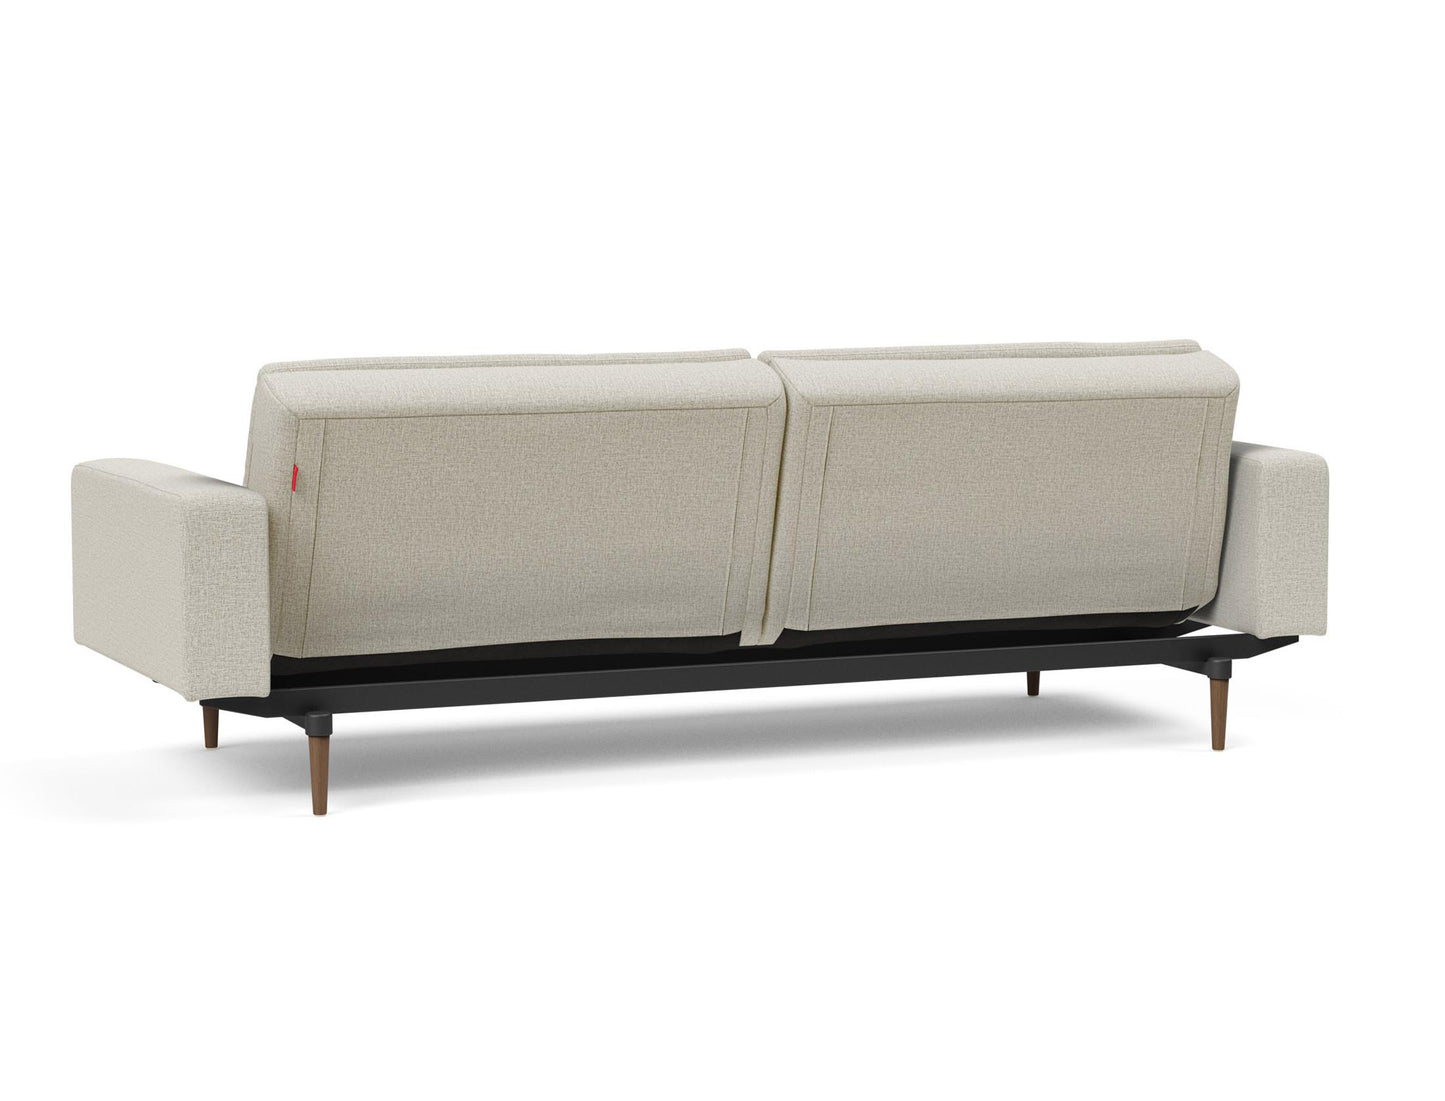 Innovation Living Dublexo Deluxe Sofa Bed Dark Wood with Arms